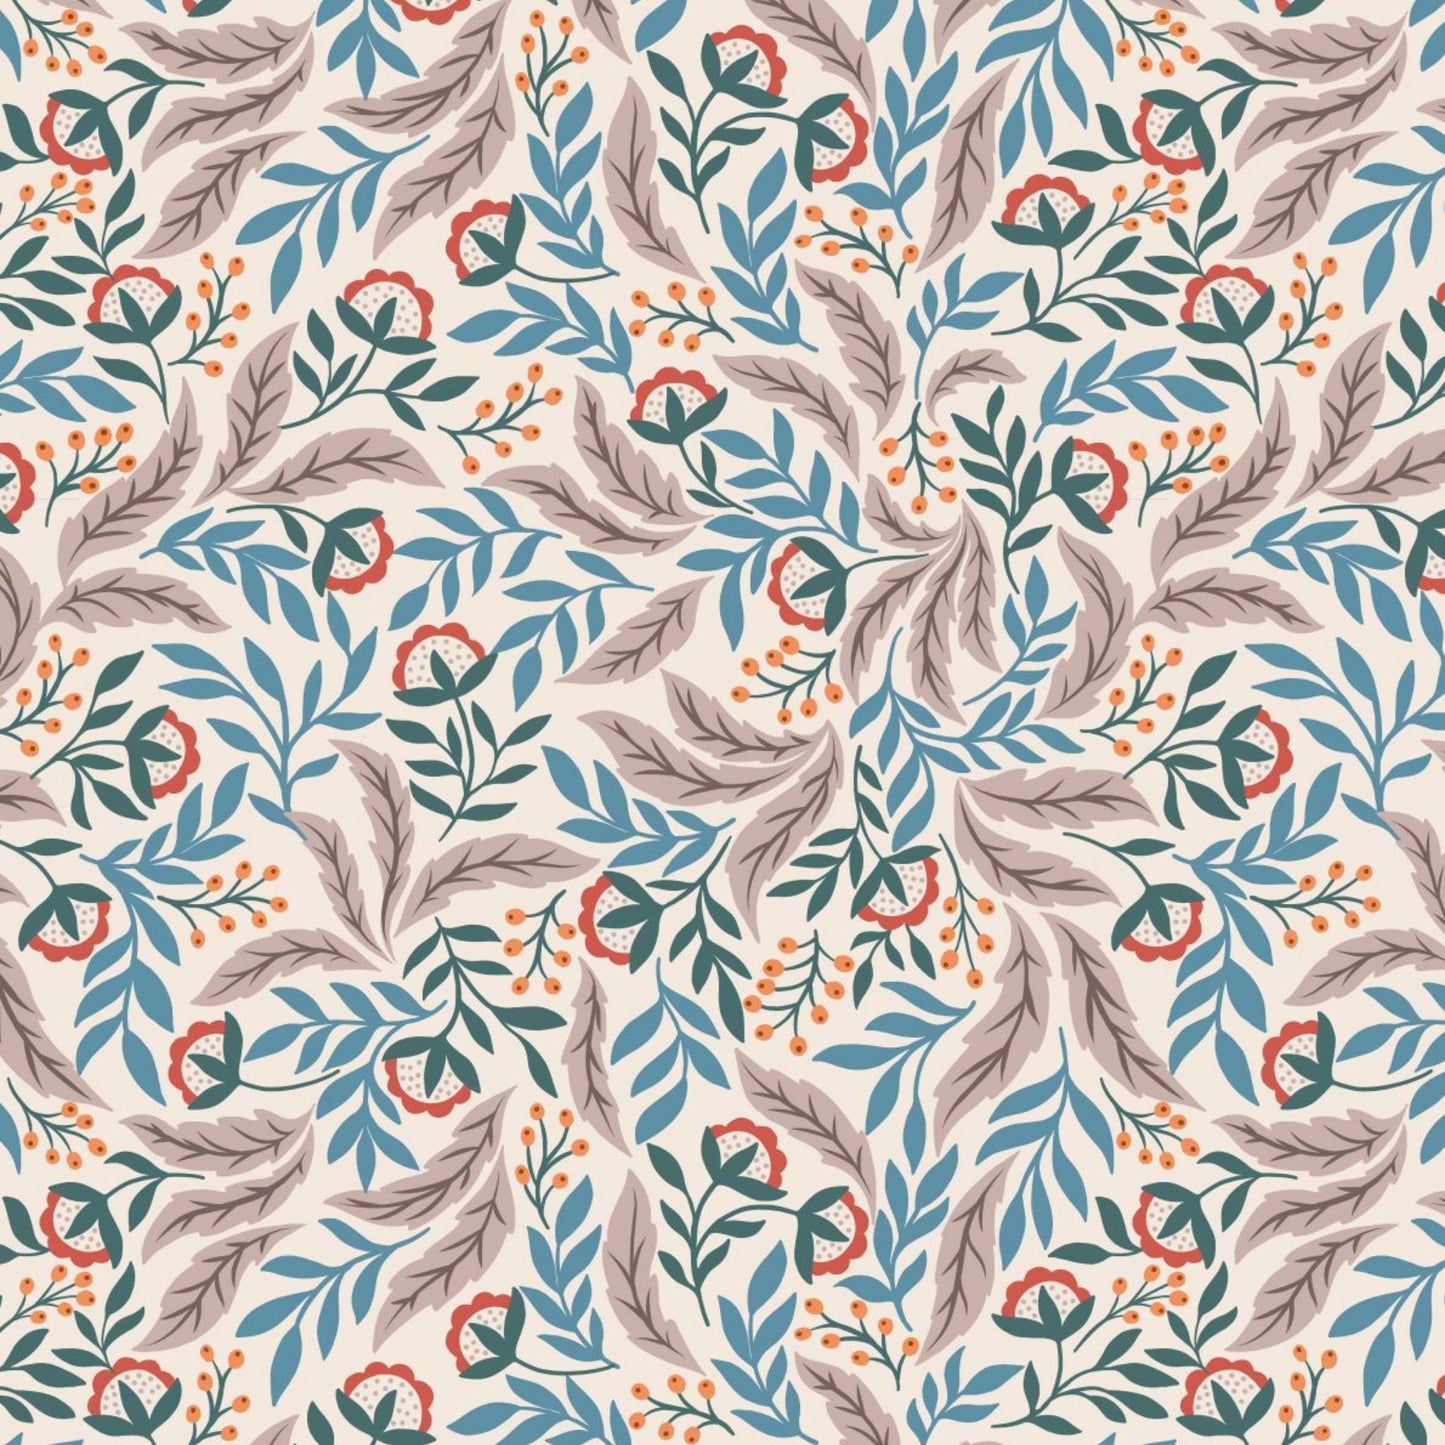 Arts and Crafts Floral - Wintertide Fabric Range - Lewis and Irene - Copper Metallic on Cream